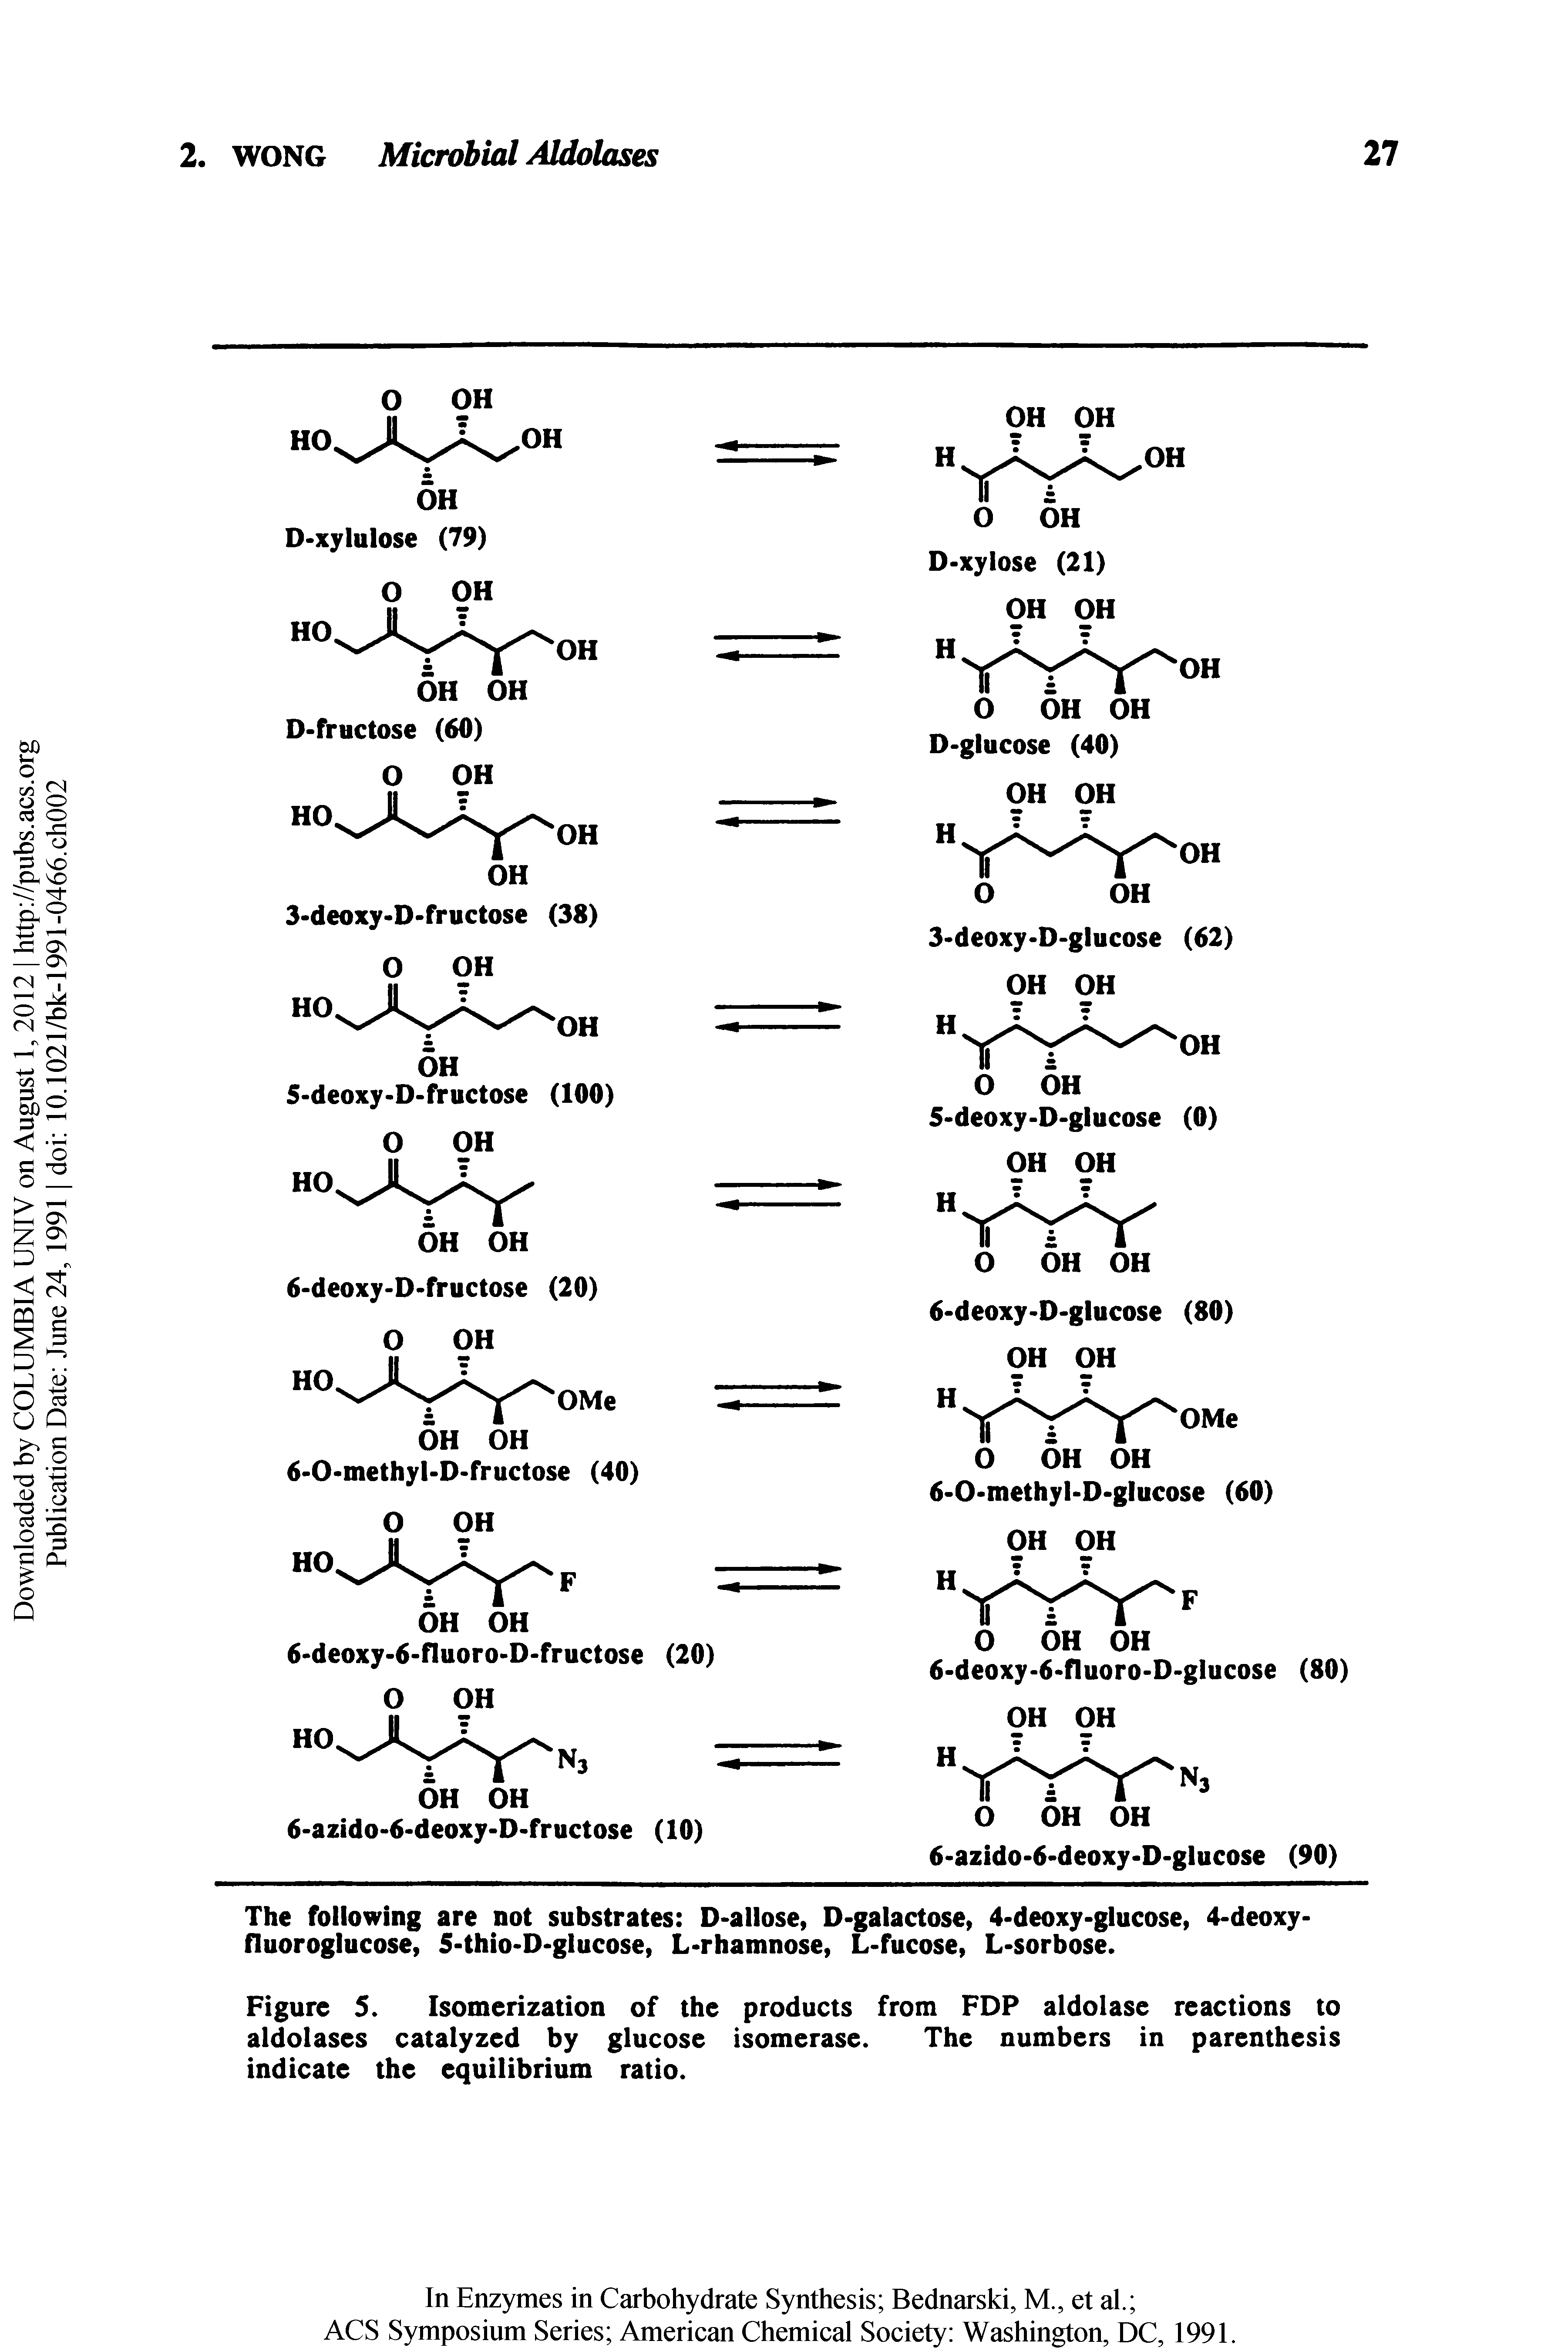 Figure 5. Isomerization of the products from FDP aldolase reactions to aldolases catalyzed by glucose isomerase. The numbers in parenthesis indicate the equilibrium ratio.